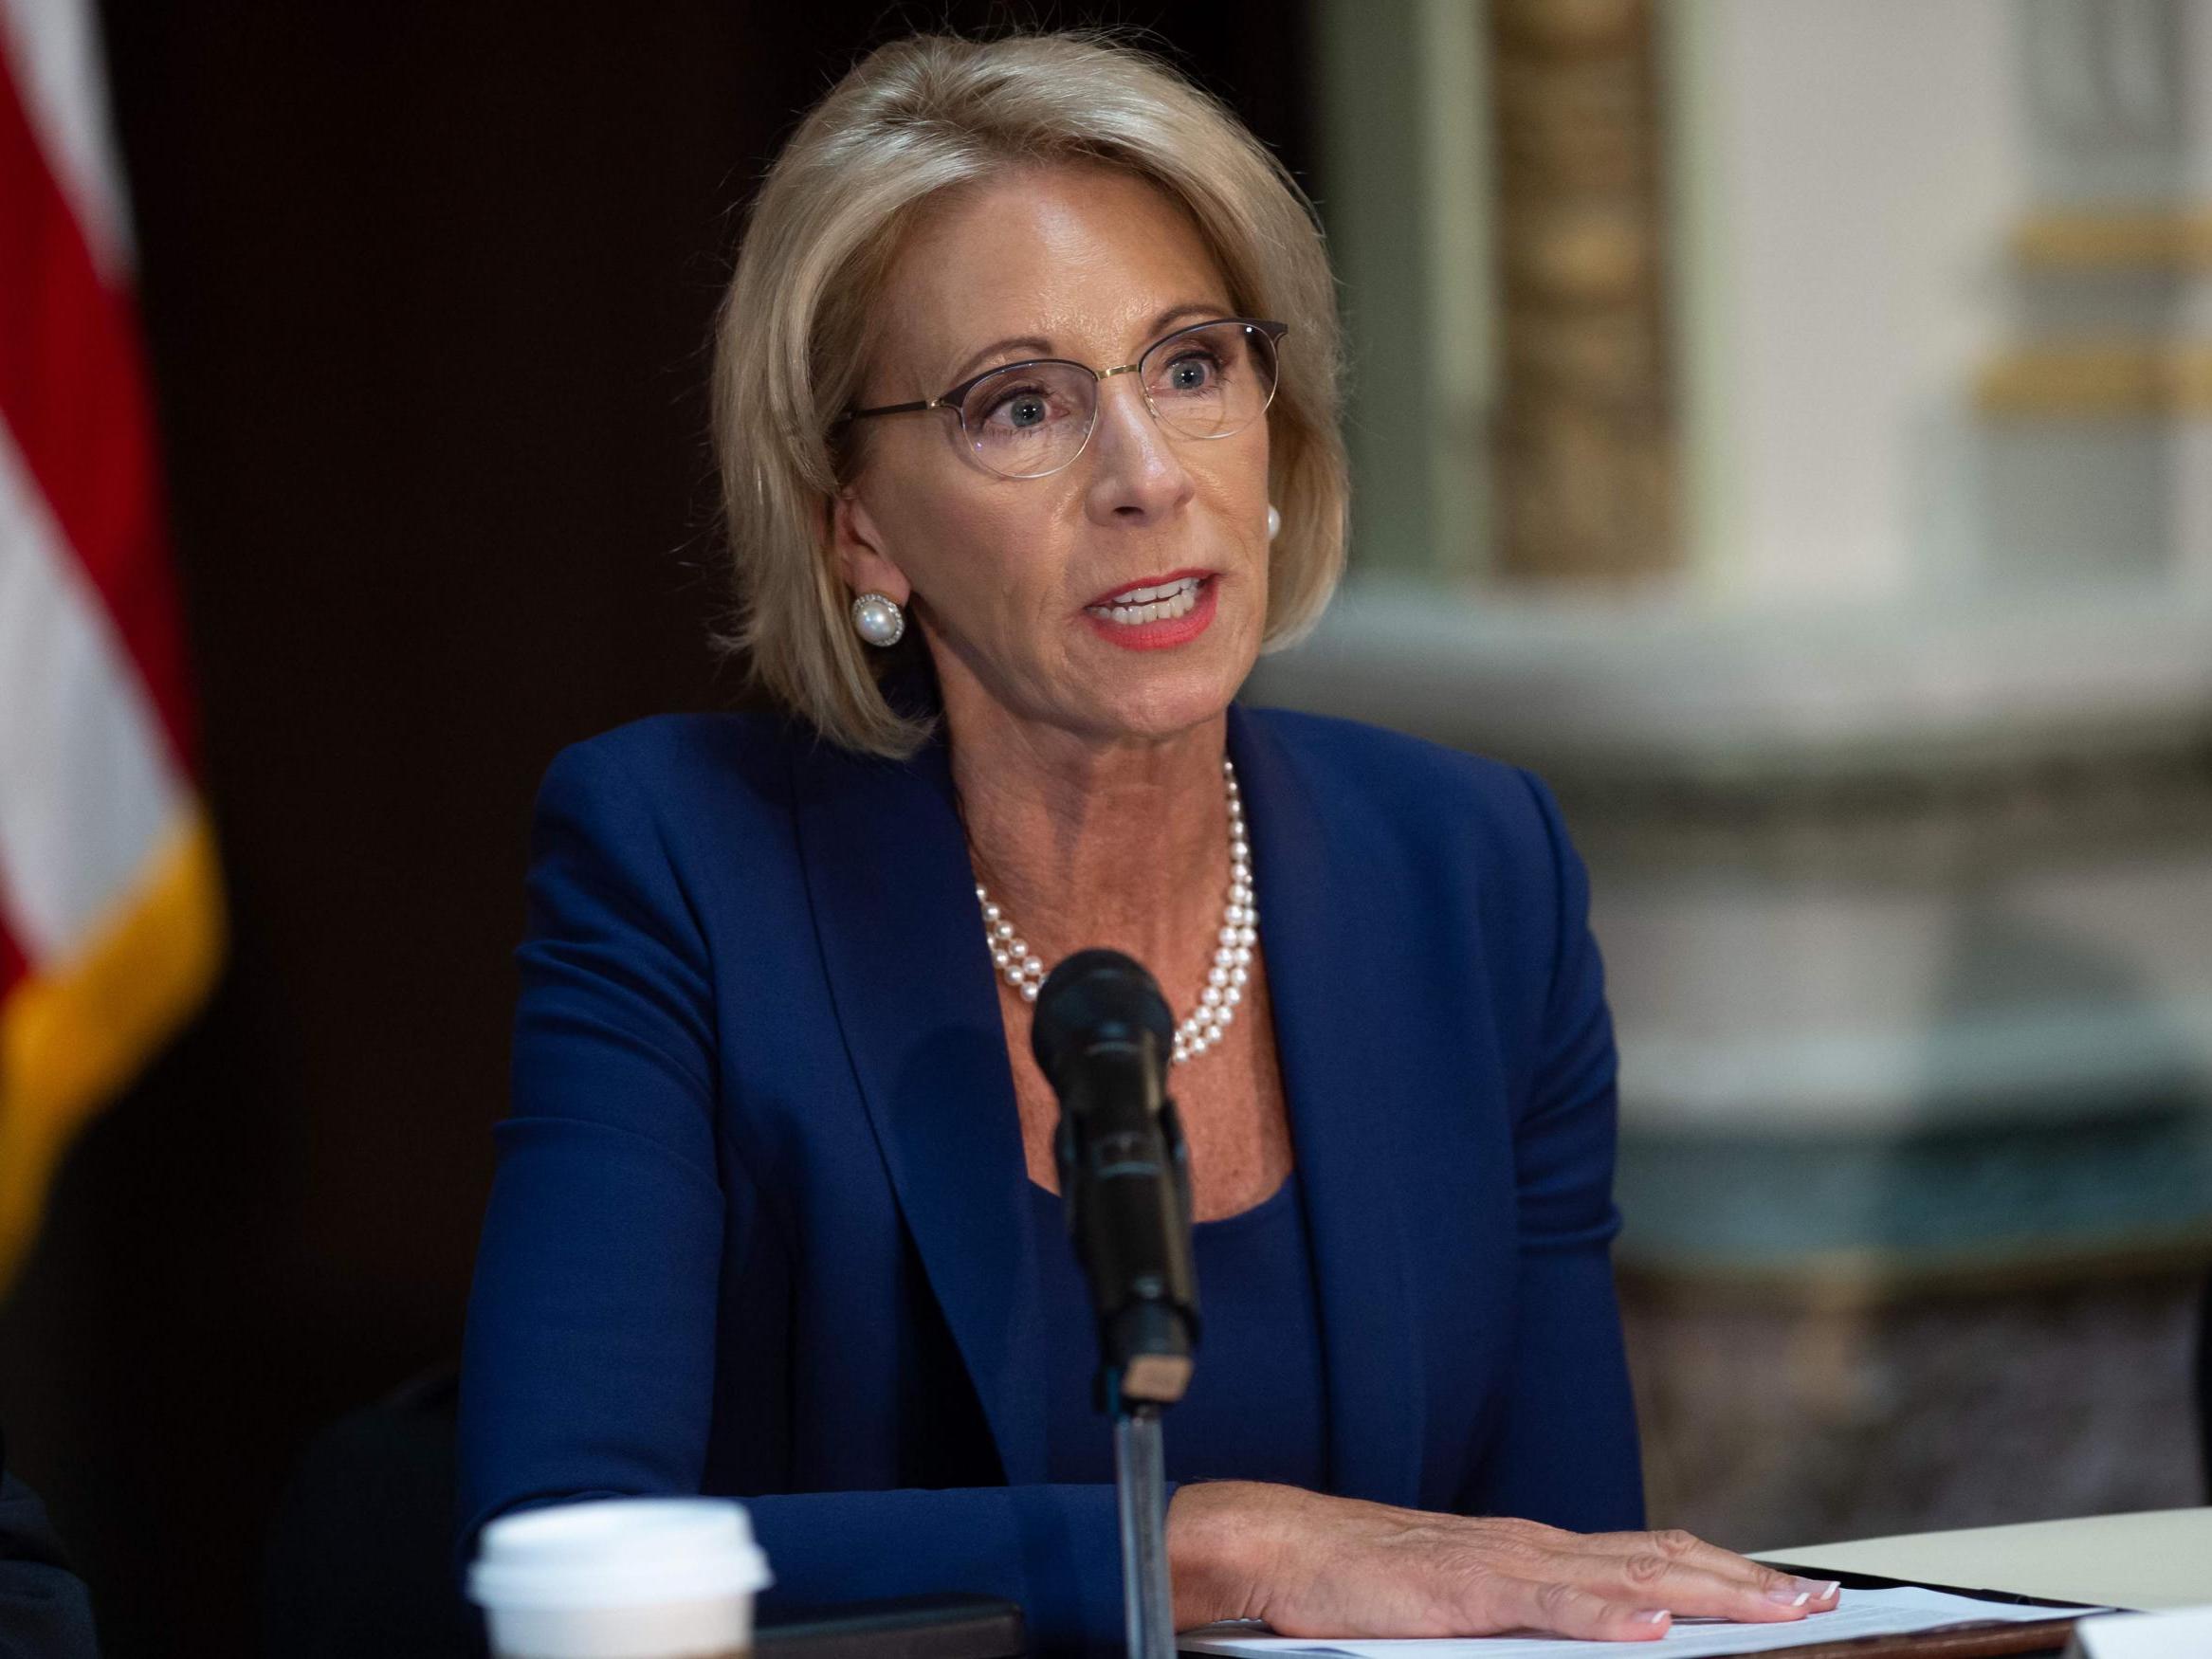 DeVos is now making decisions during a pandemic which will affect all of us